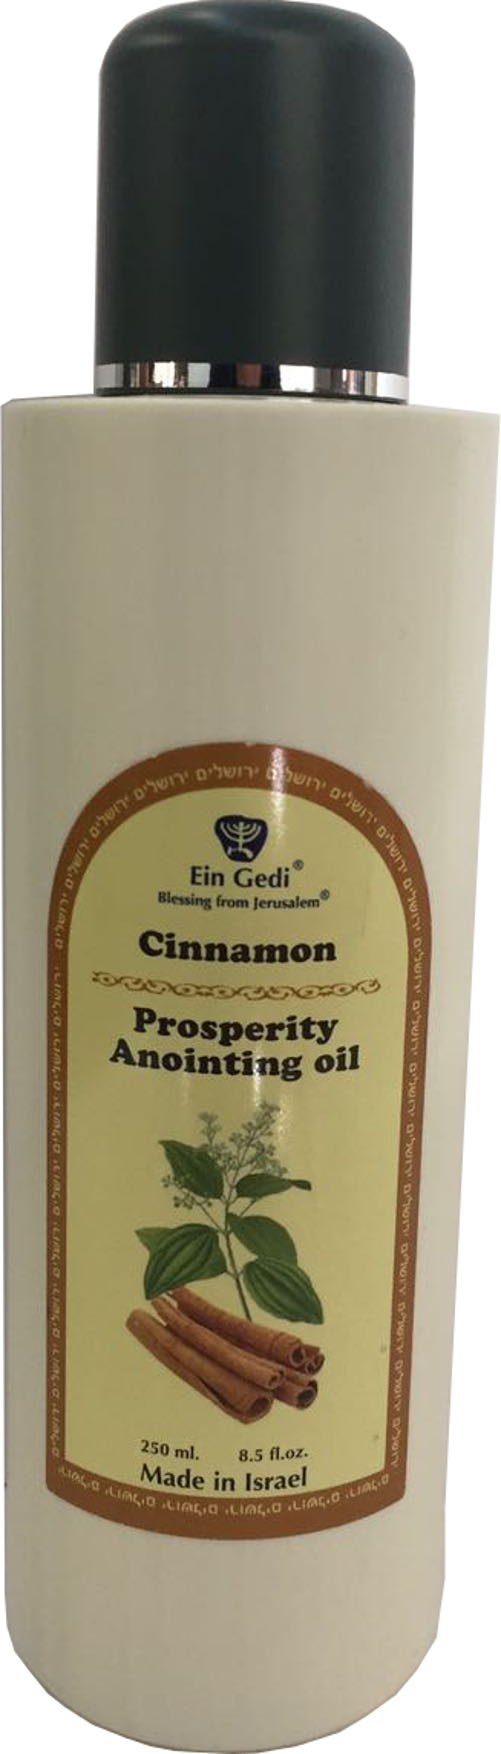 Cinnamon anointing Oil from Ein Gedi large size - Anointing oil - 250 ml ( 8.5 fl. oz. )